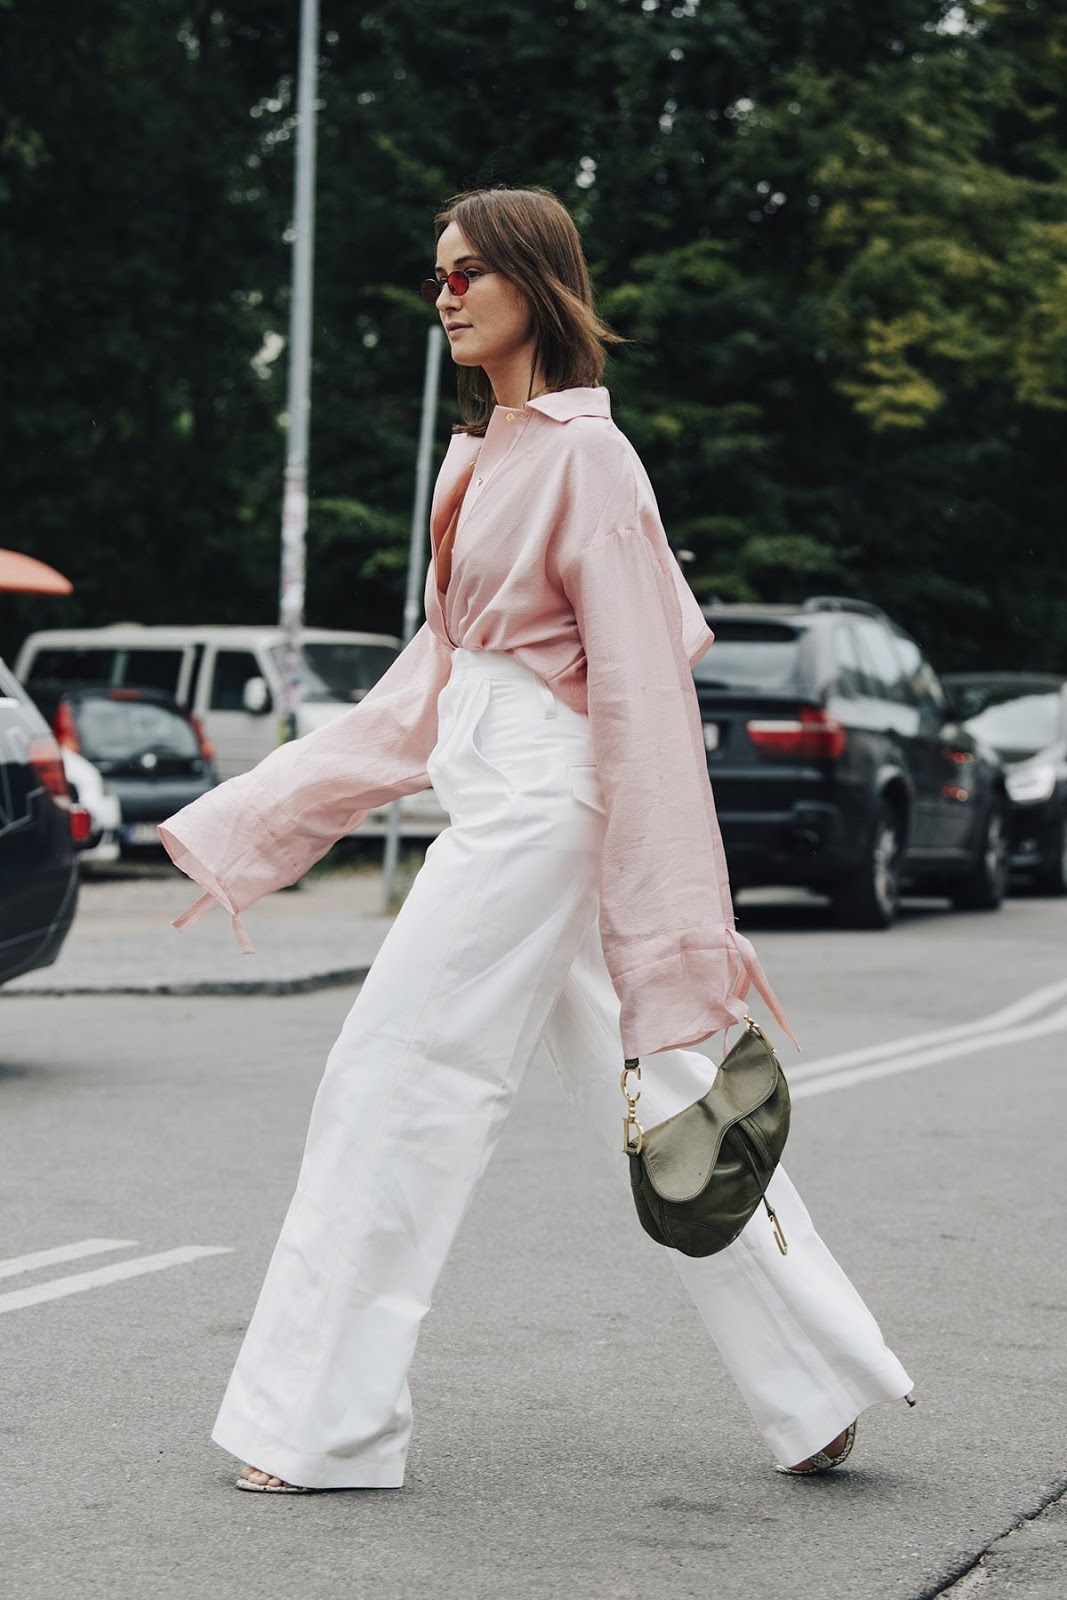 25 Cool Pink Tops to Wear for Spring and Beyond — Street style outfit with a pink button-down, white wide-leg pants, and green Dior saddle bag